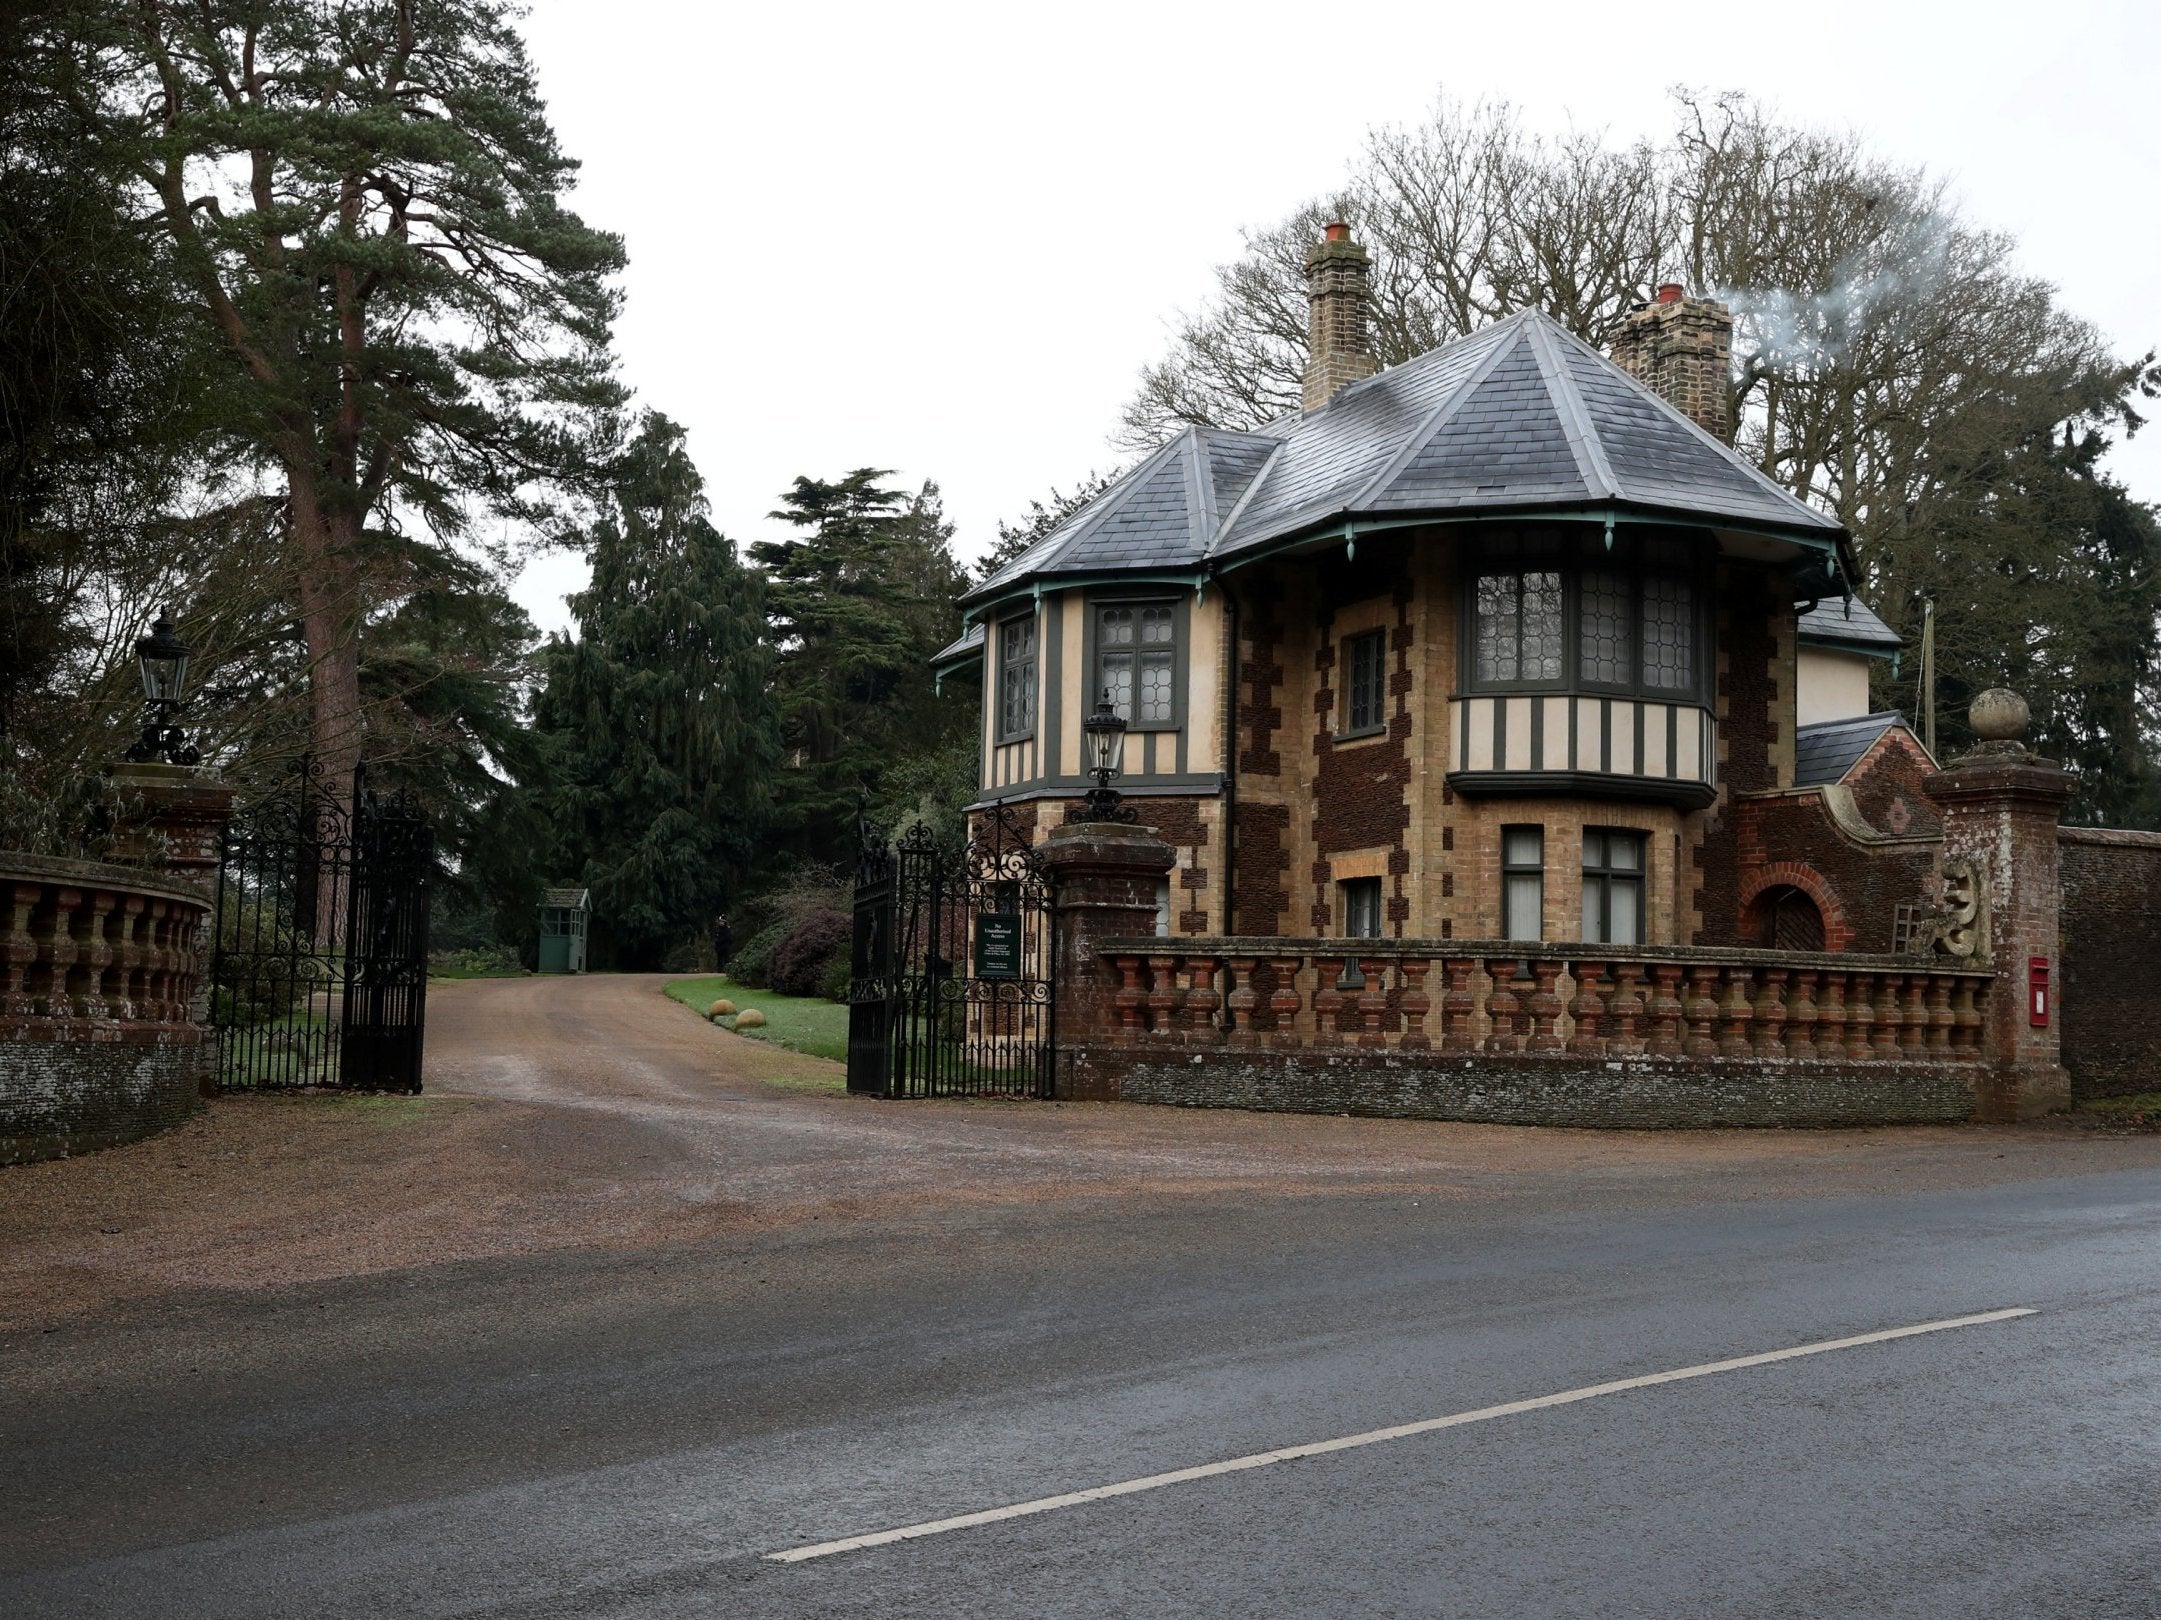 A general view of the entrance to the Sandringham Estate in Norfolk.